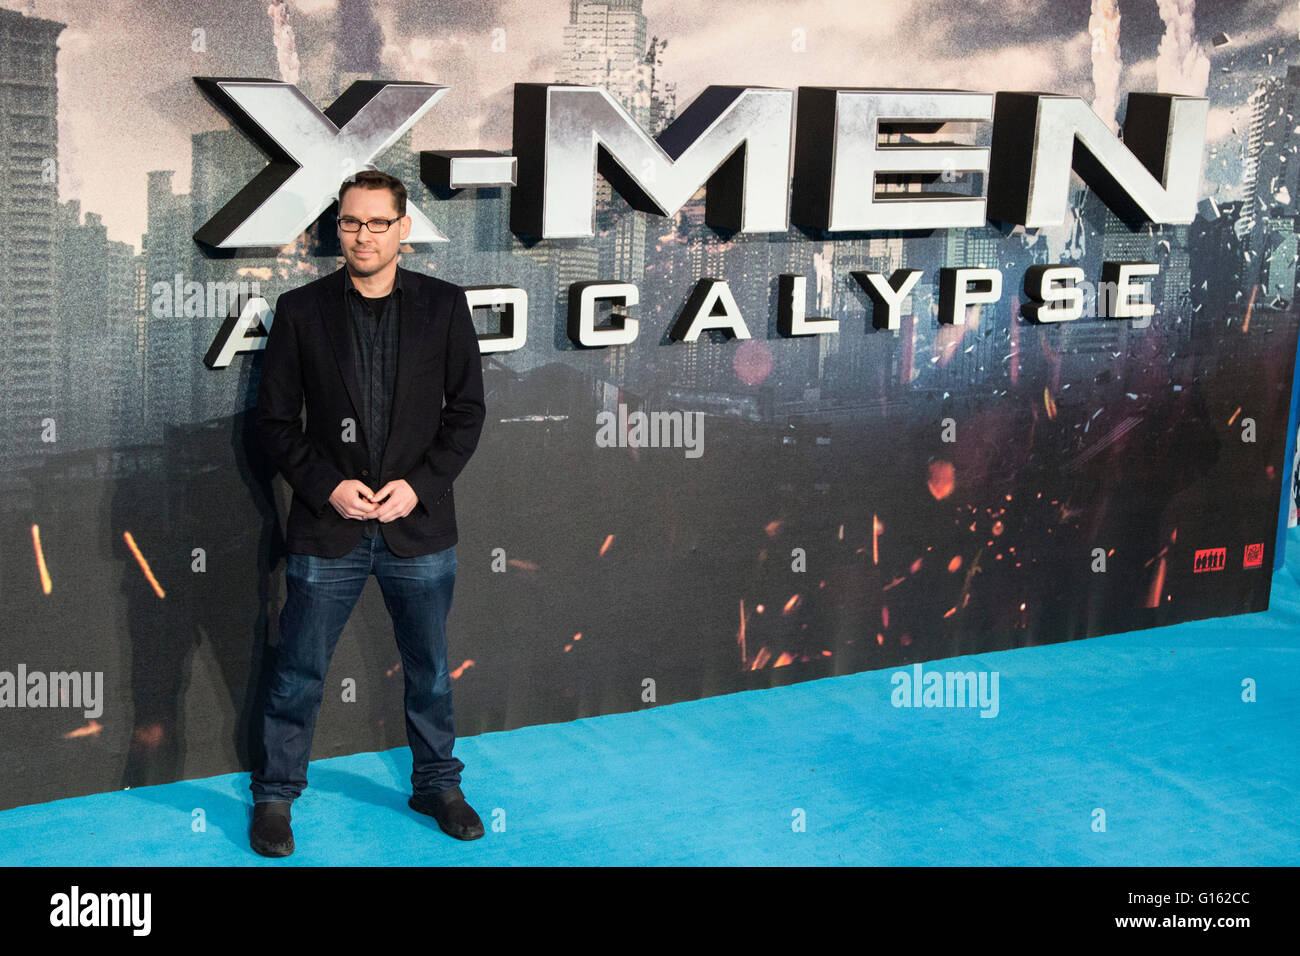 London, UK. 9 May 2016. Director Bryan Singer attends the X-Men: Apocalypse - Global Fan Screening at the BFI Imax cinema in London. Credit:  Vibrant Pictures/Alamy Live News Stock Photo